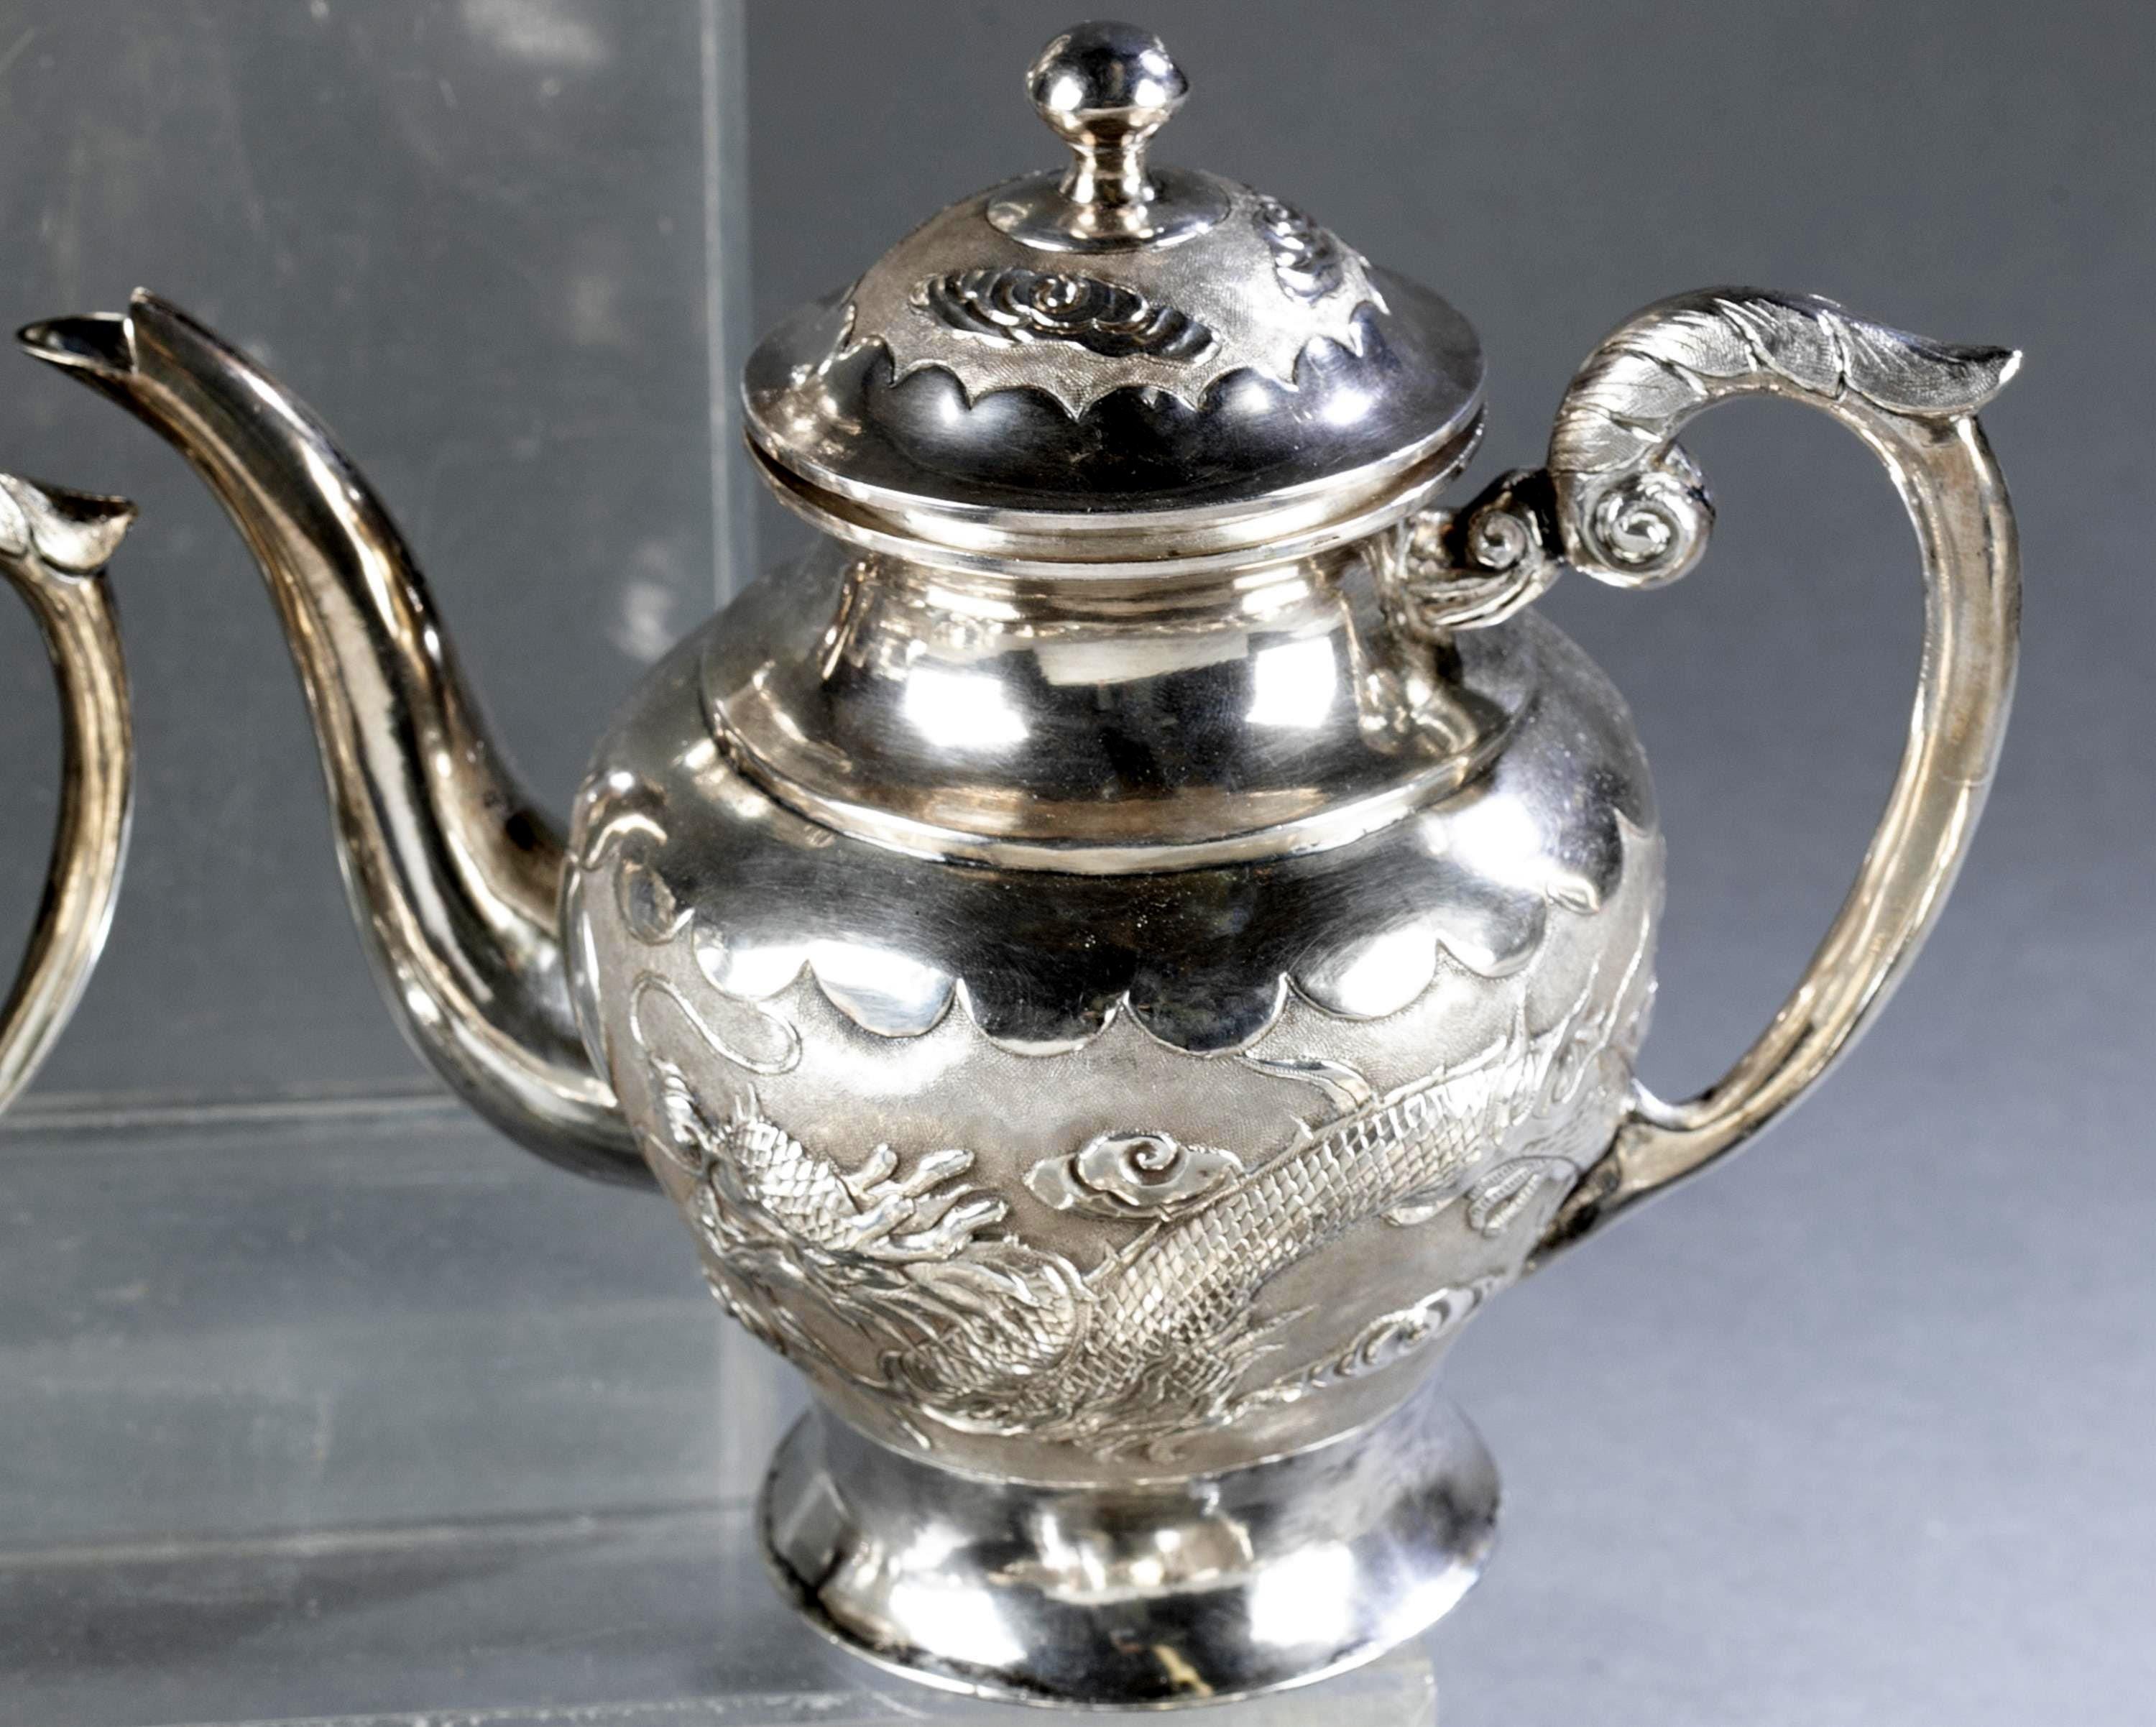 Rare Chinese Export Sterling Silver Tea Set with Dragon Design Tianjing Wuhua For Sale 7